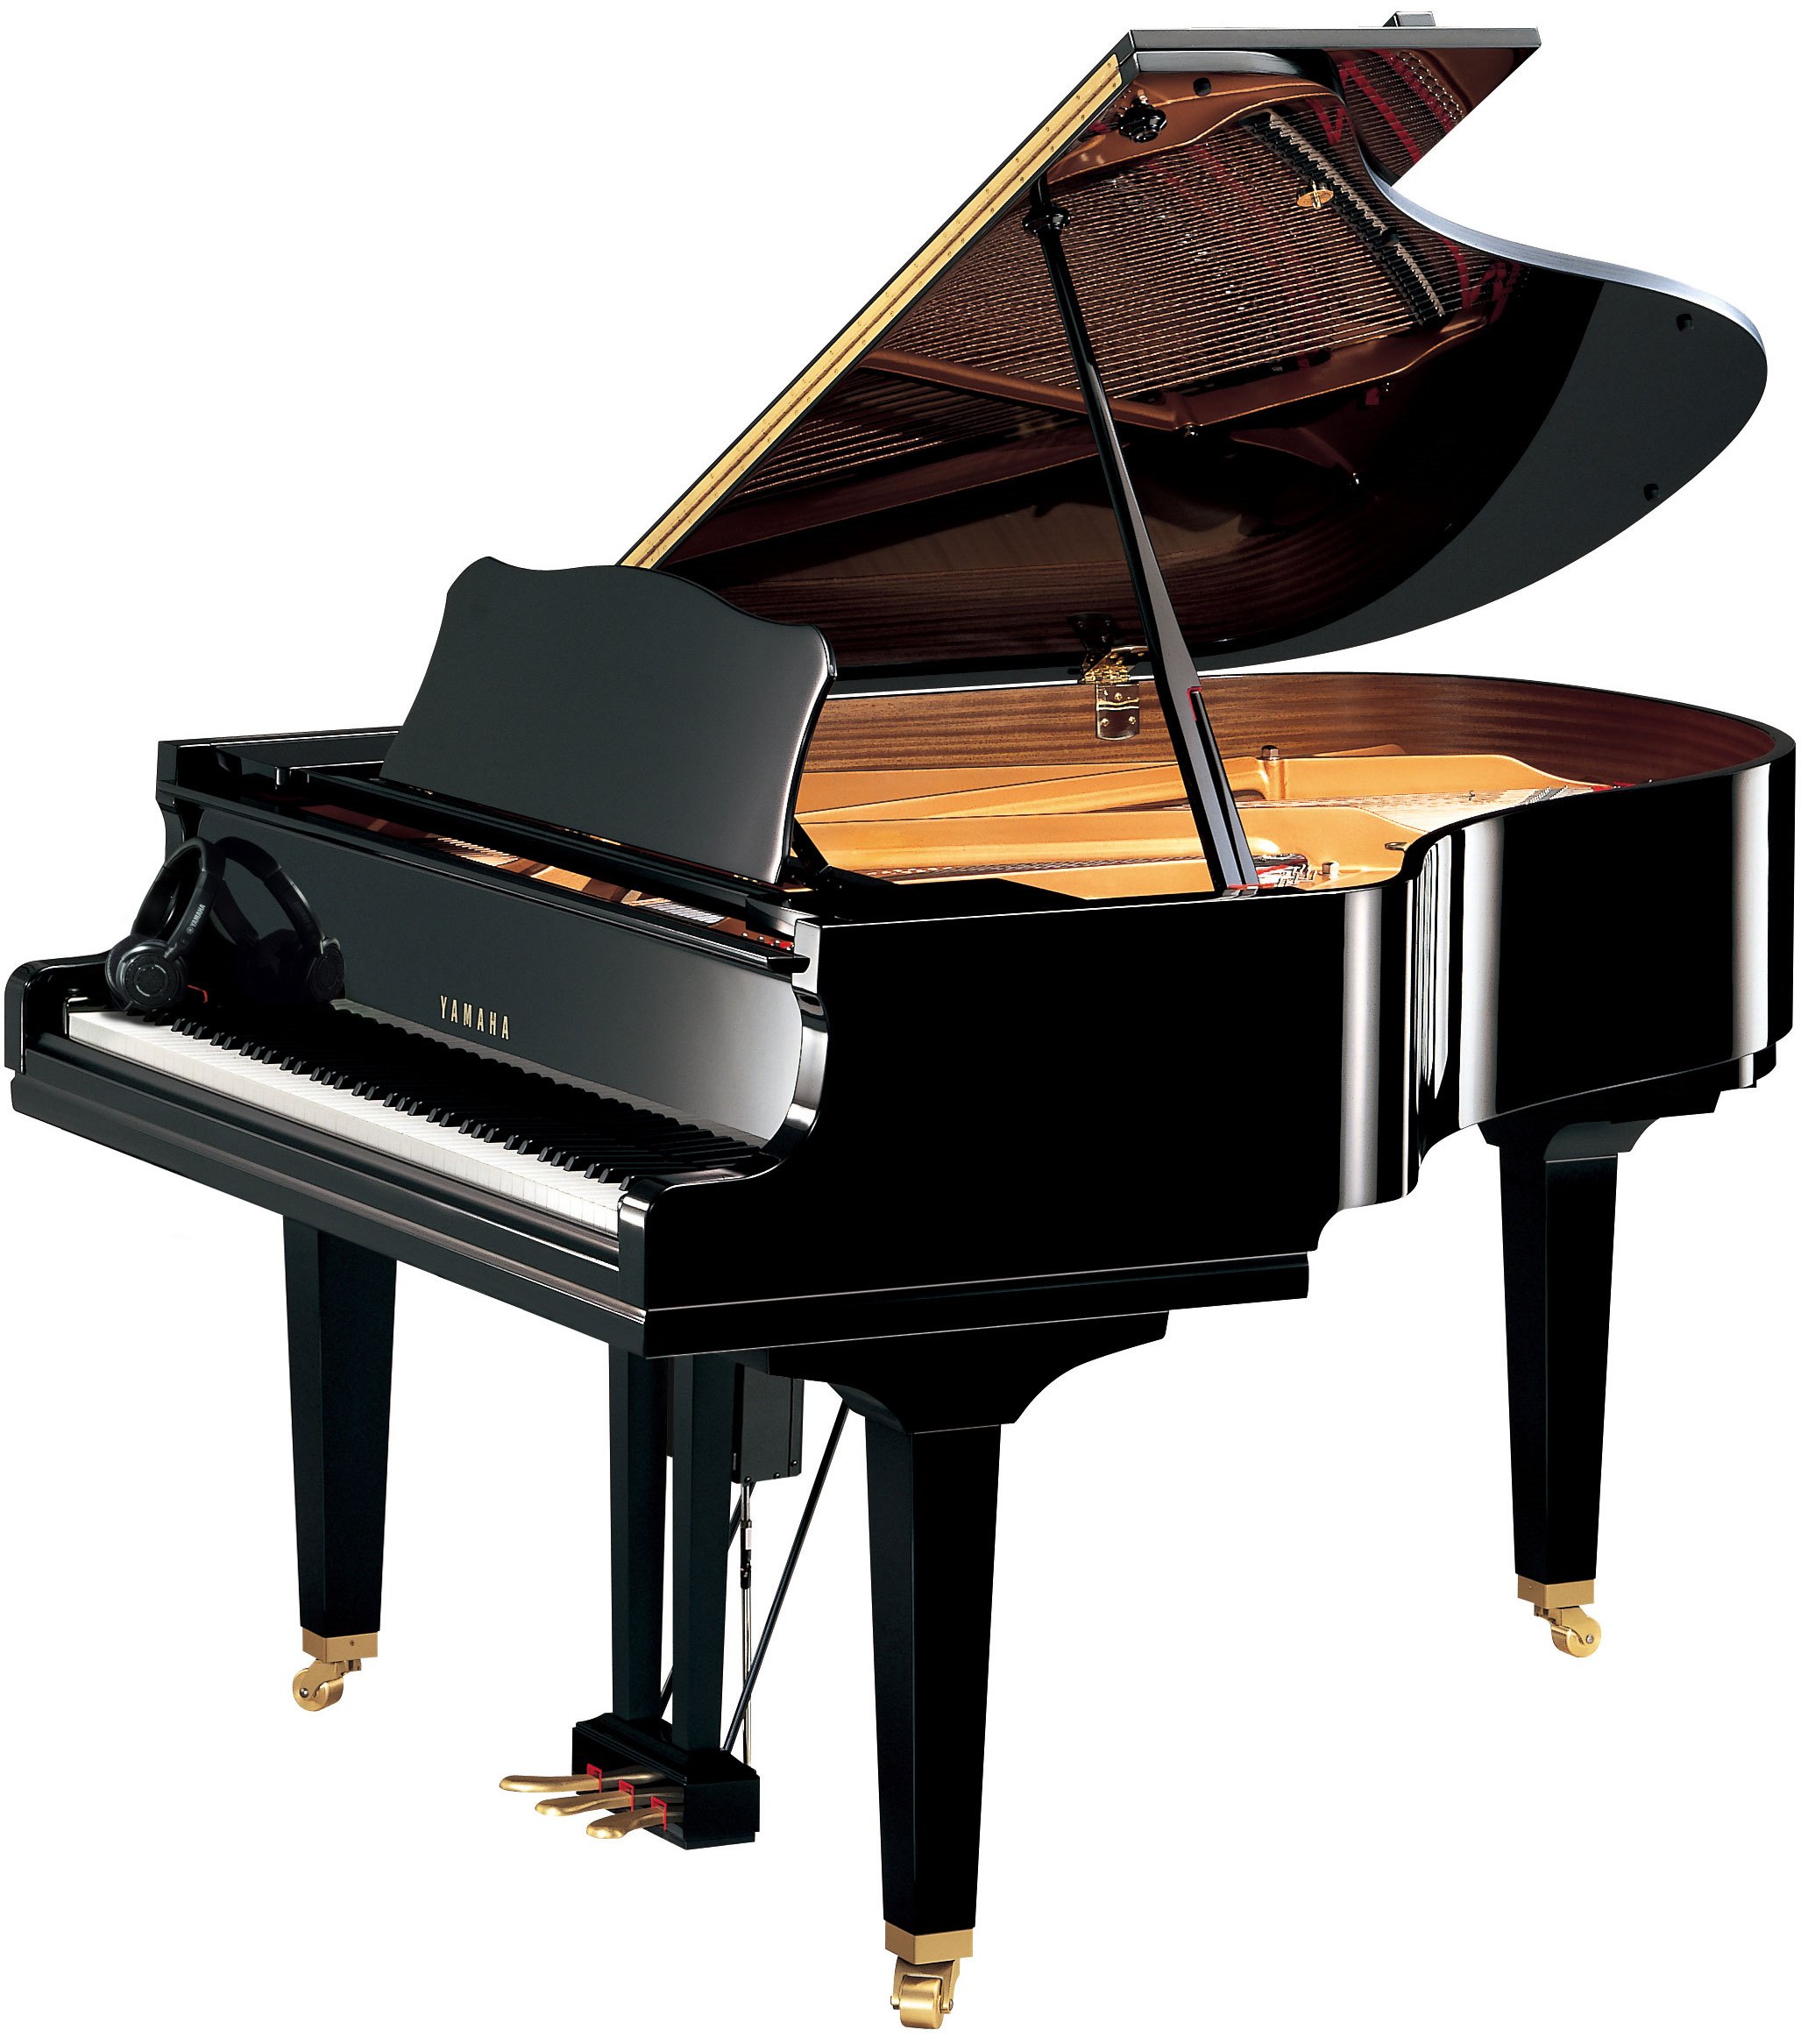 ENSPIRE ST - Overview - Disklavier - Pianos - Musical Instruments 